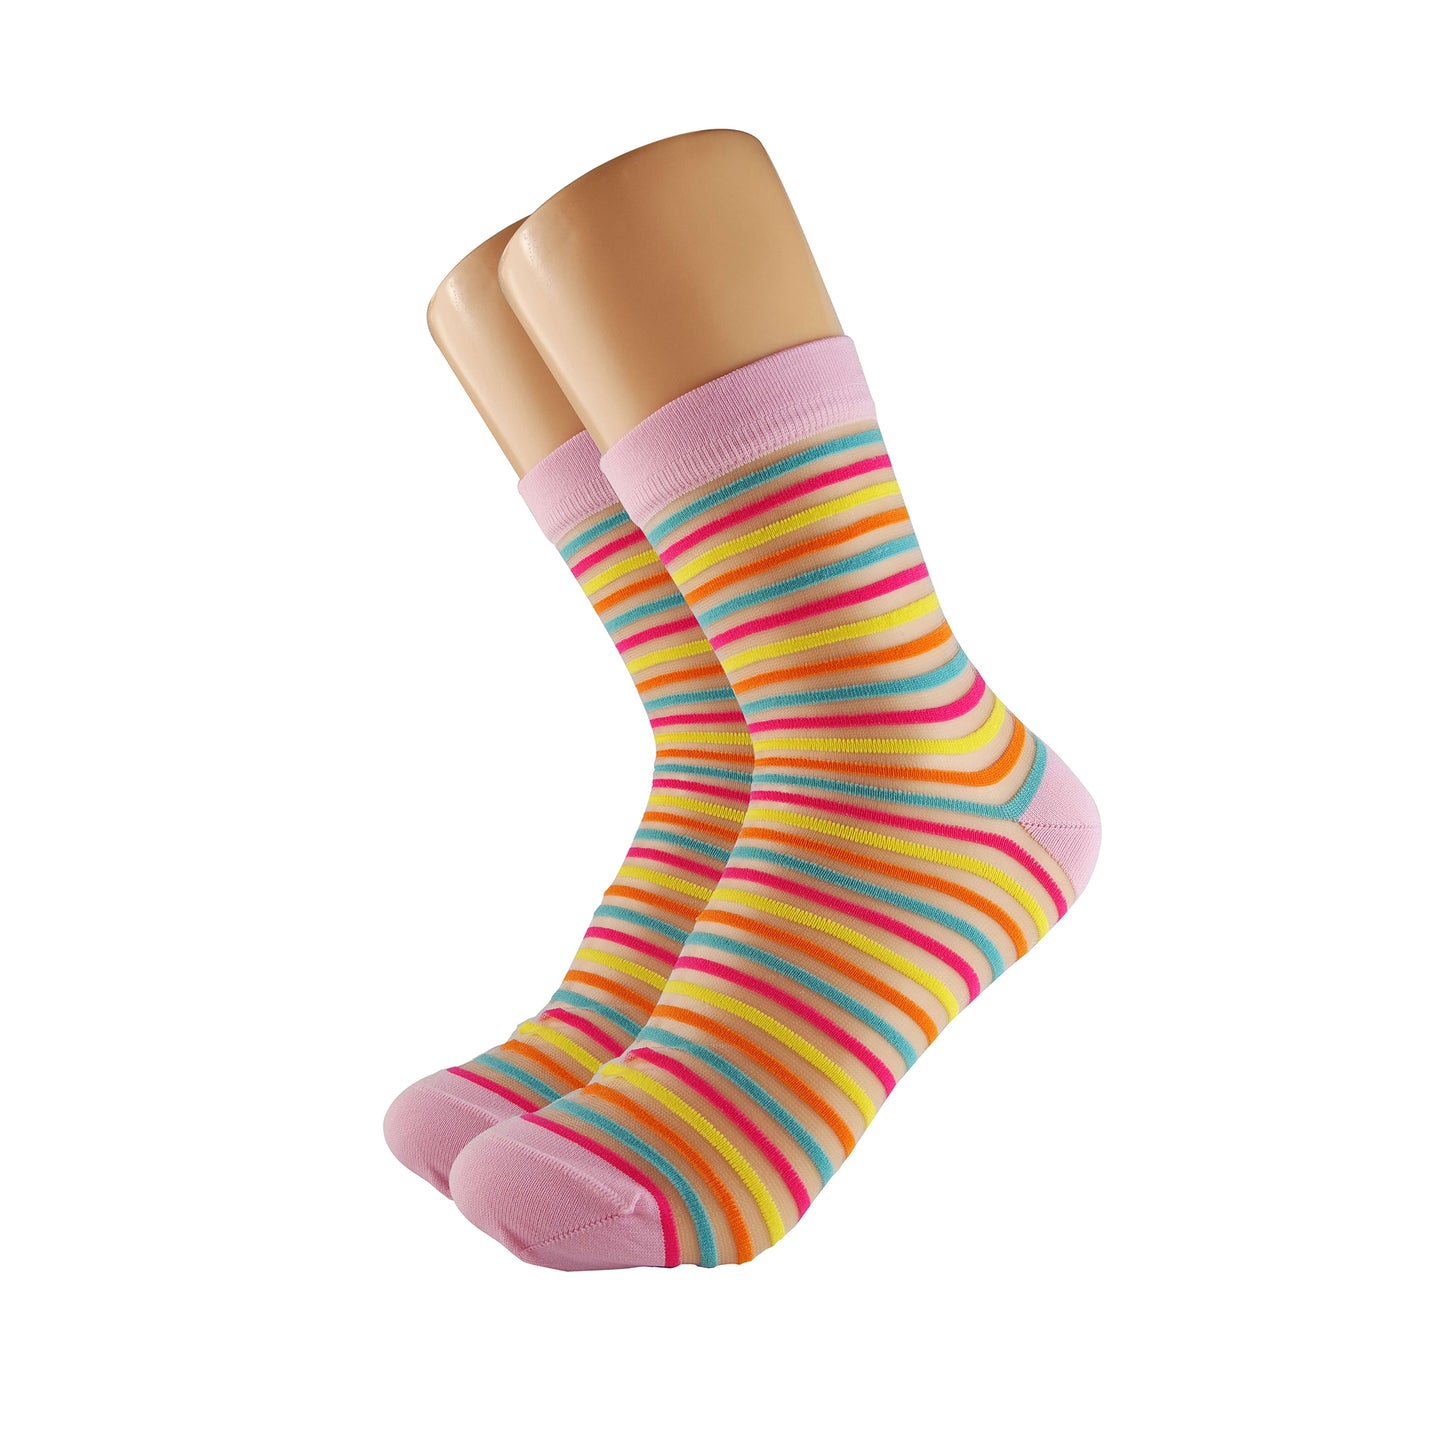 women's sheer socks with stylish pink-toned stripes, adding a chic and elegant touch to the outfit.